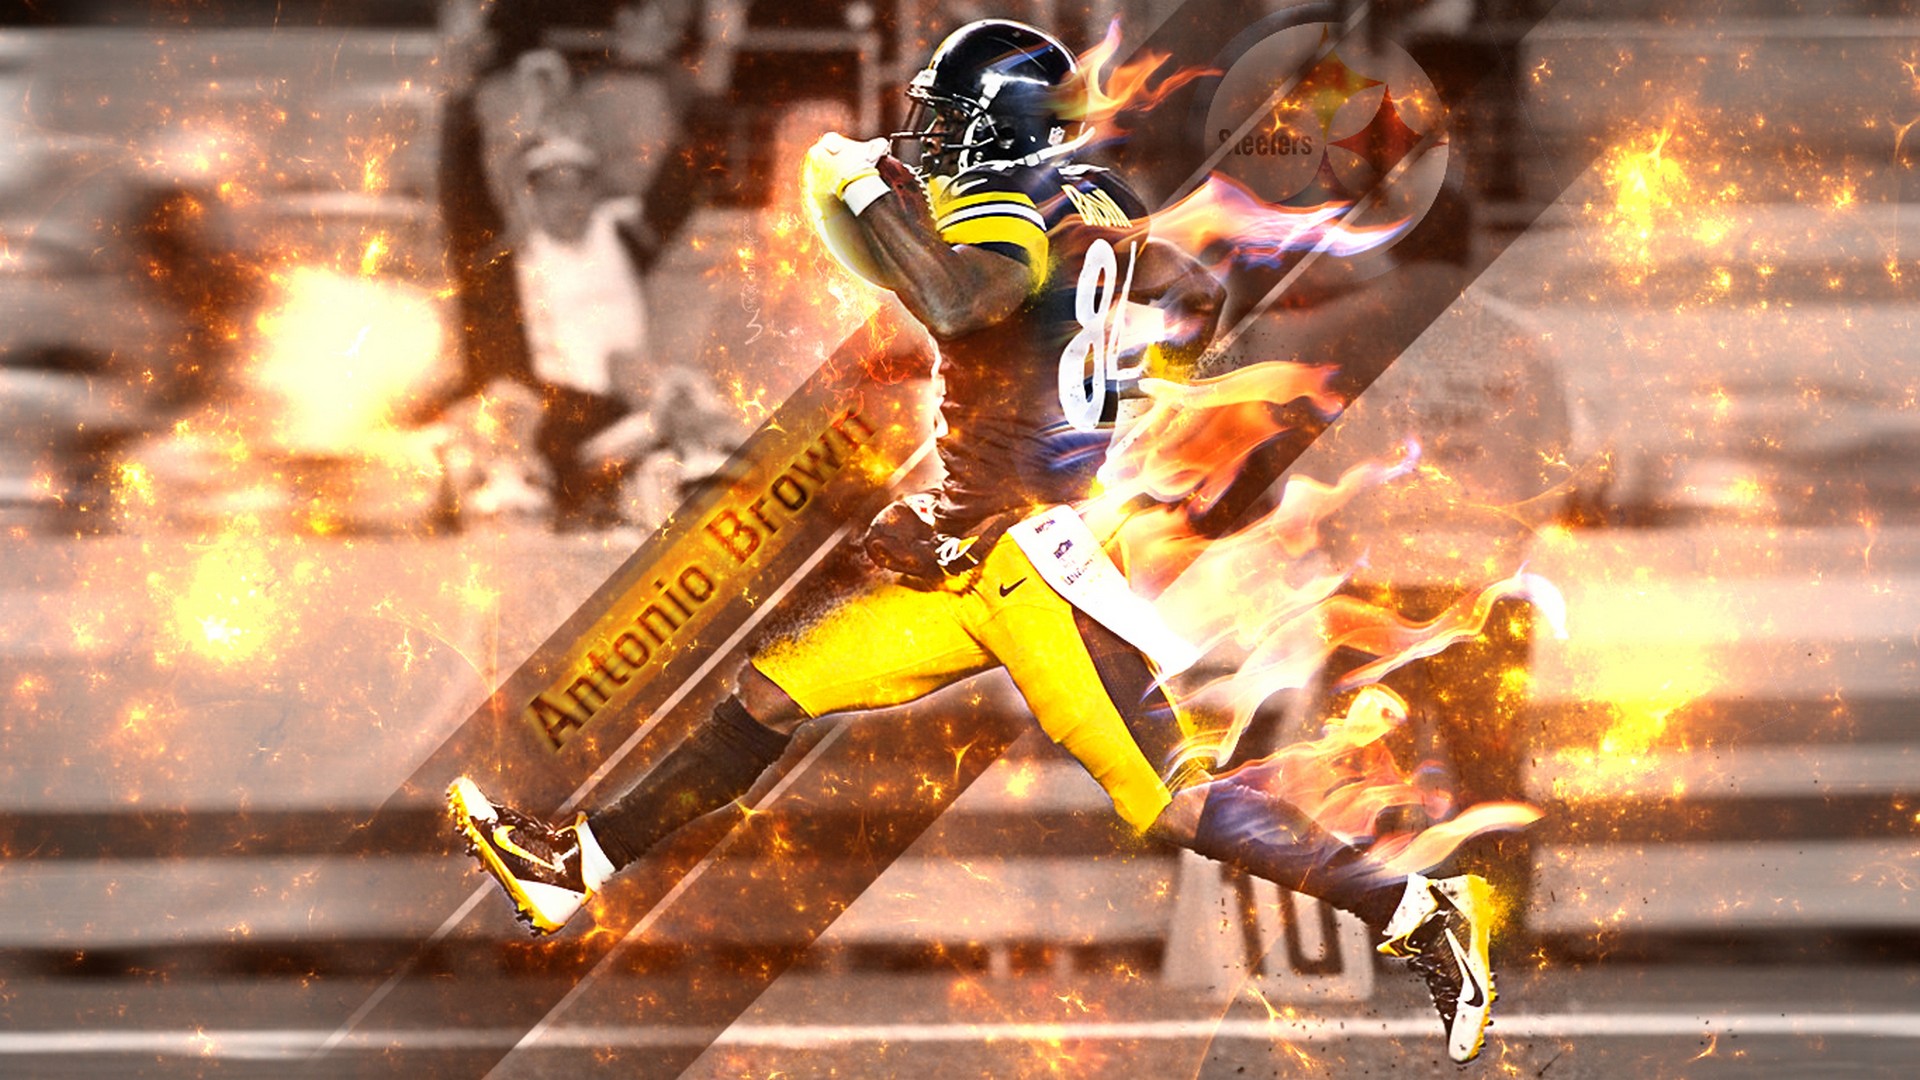 HD Pitt Steelers Backgrounds With Resolution 1920X1080 pixel. You can make this wallpaper for your Mac or Windows Desktop Background, iPhone, Android or Tablet and another Smartphone device for free